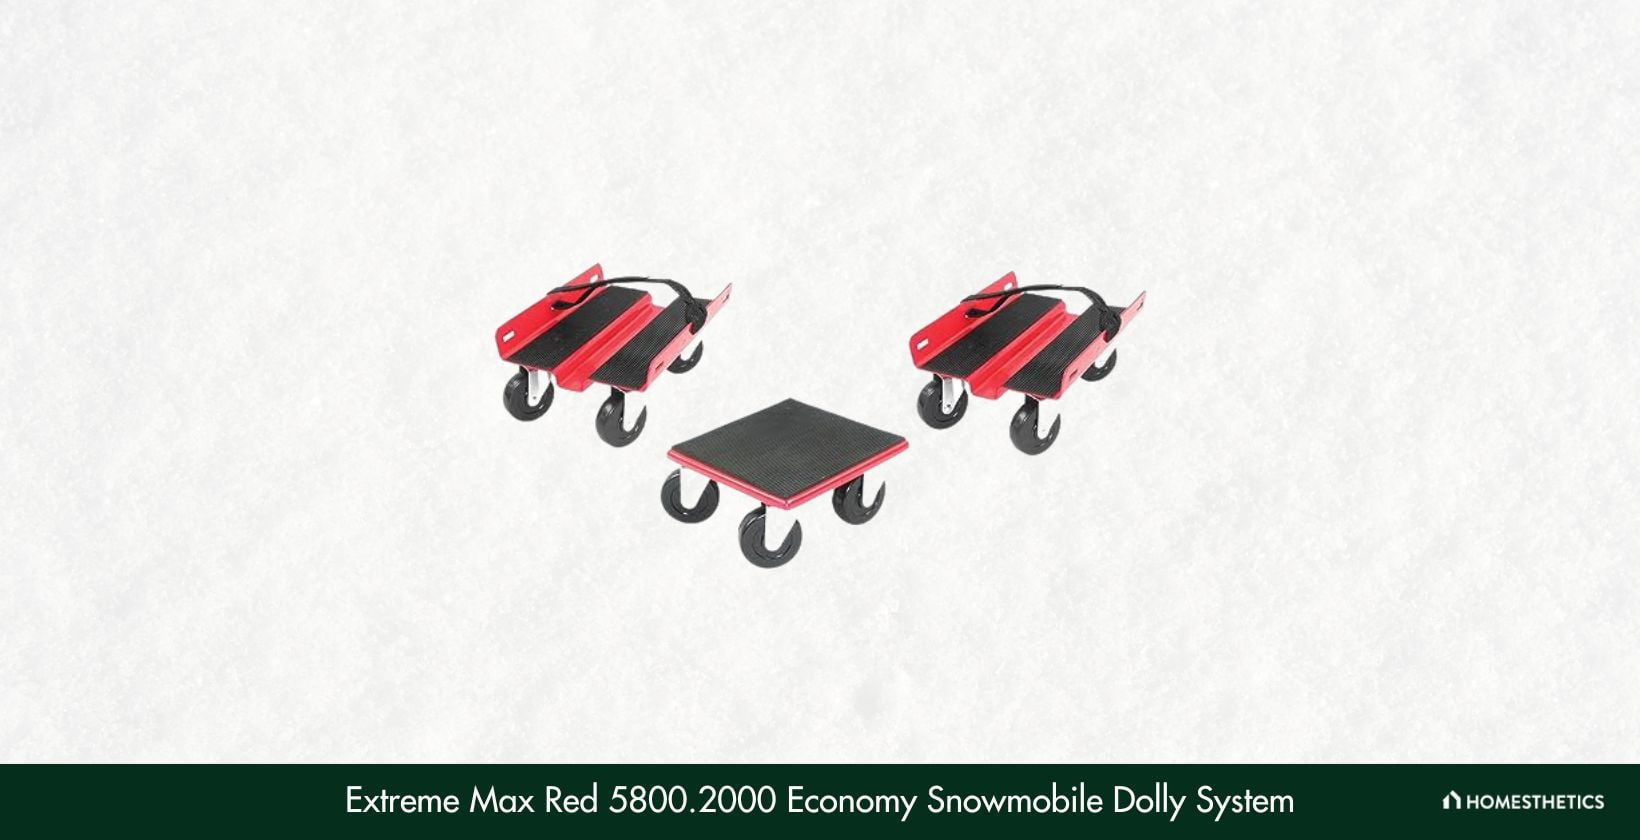 Extreme Max Red 5800.2000 Economy Snowmobile Dolly System 1